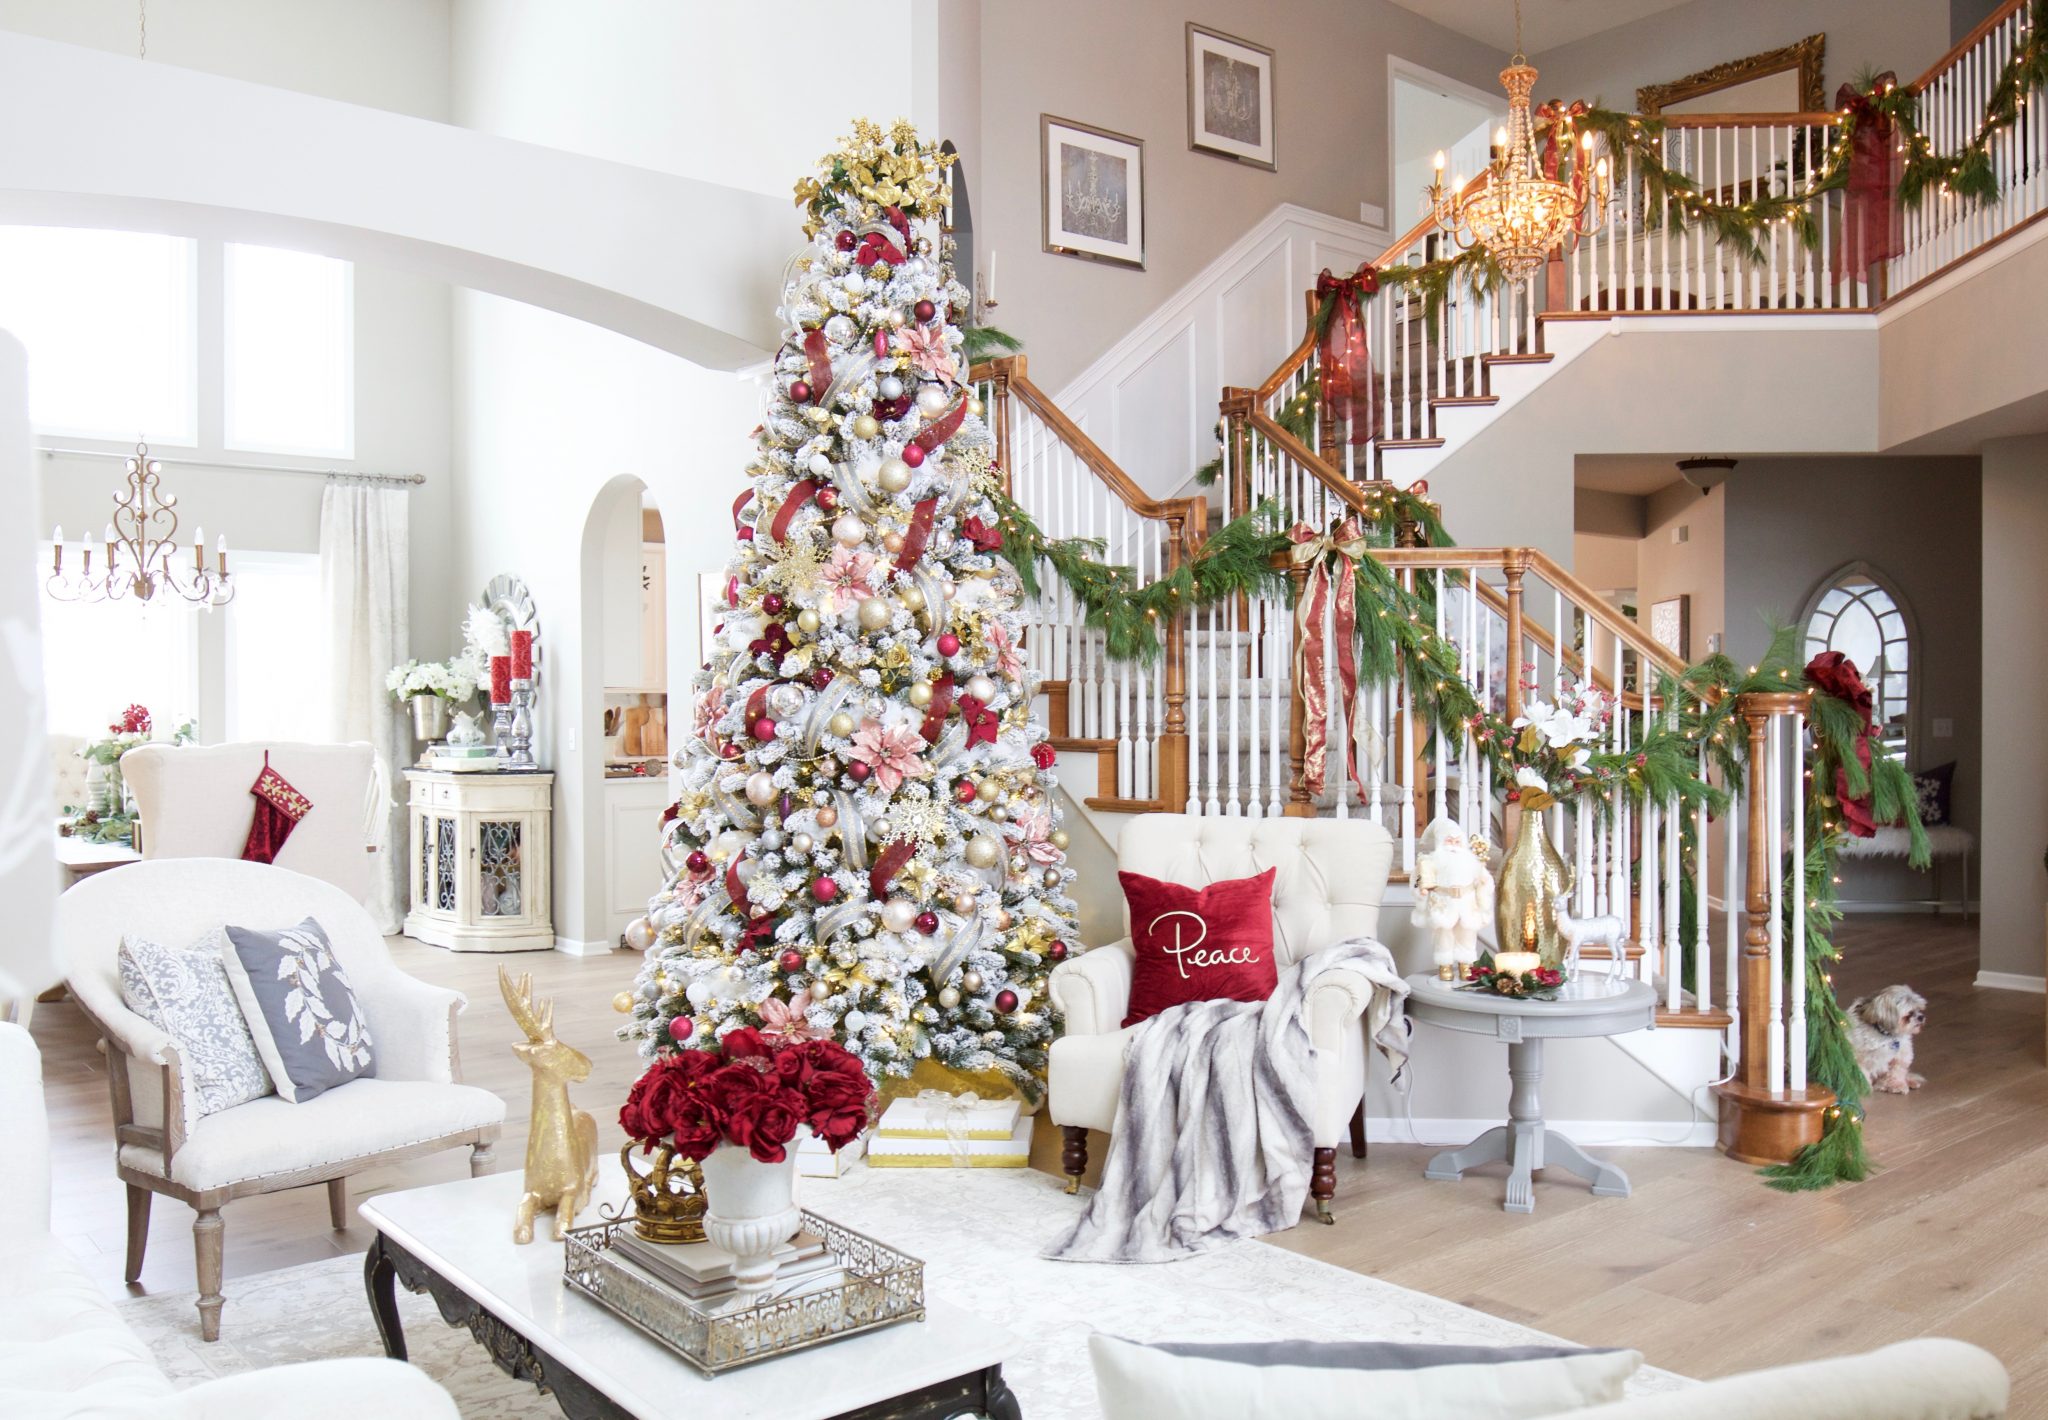 Our Best Christmas Tree Ideas for Small Spaces